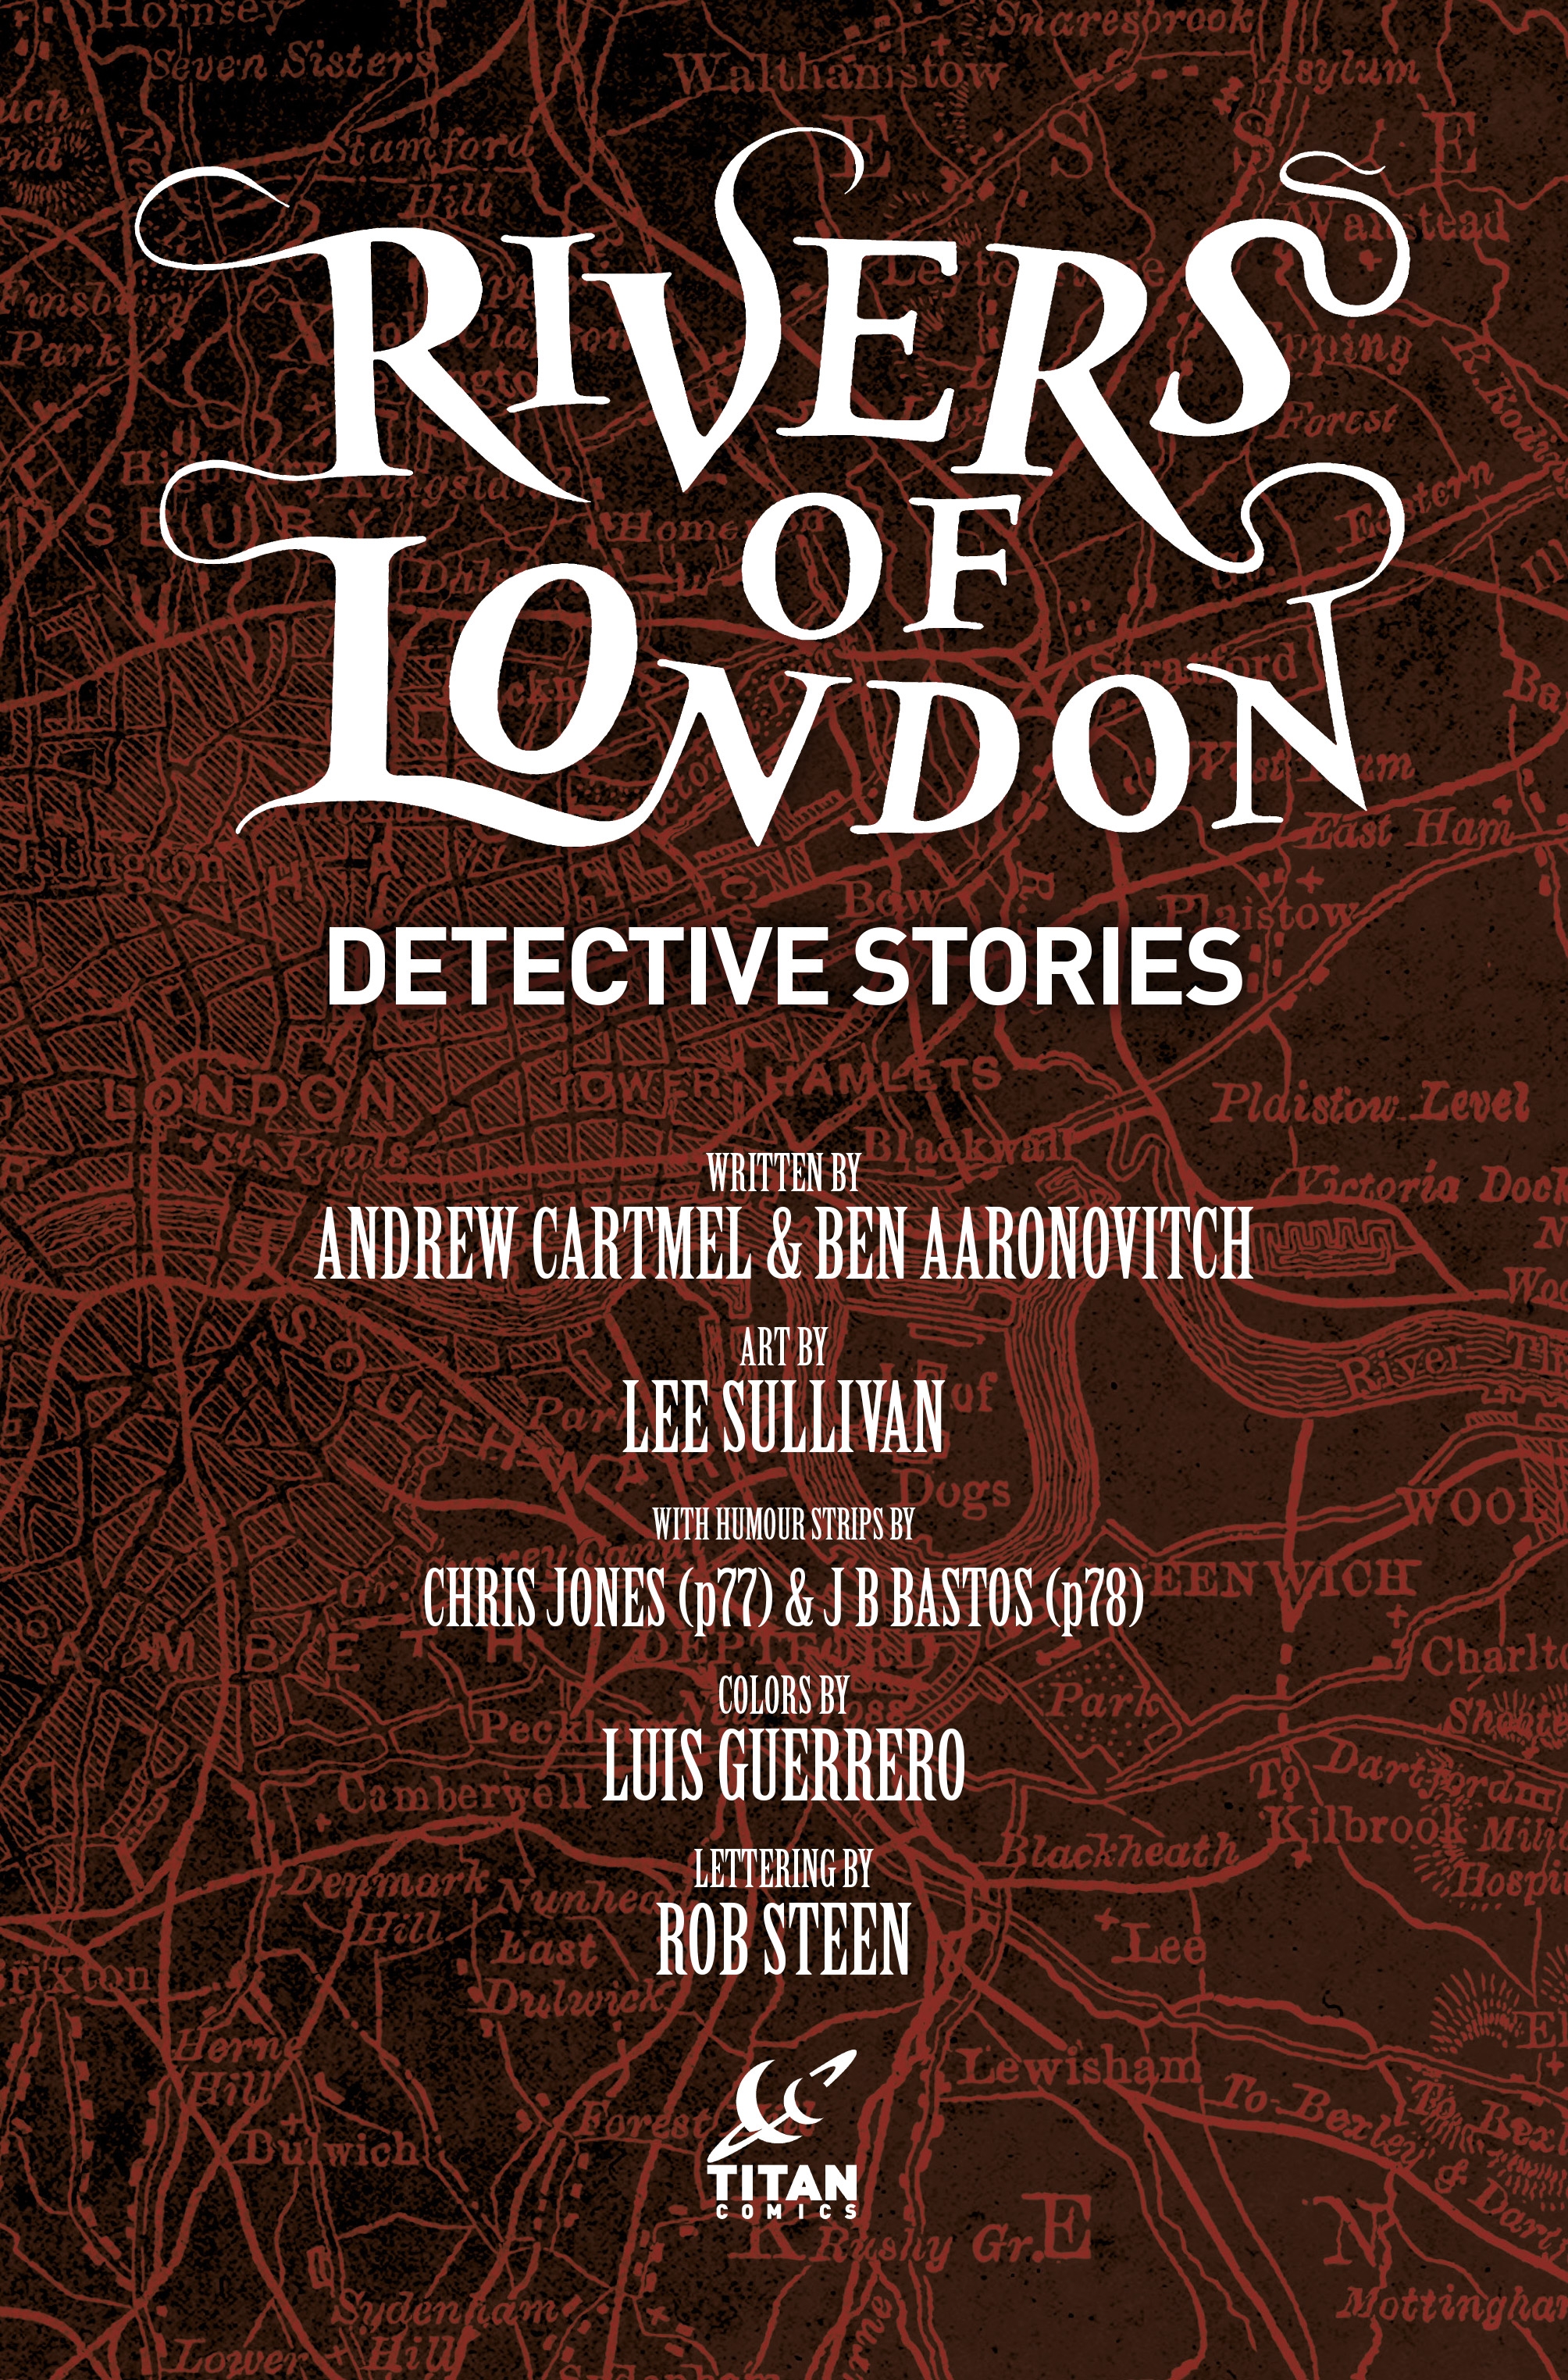 Read online Rivers of London: Detective Stories comic -  Issue # TPB - 4